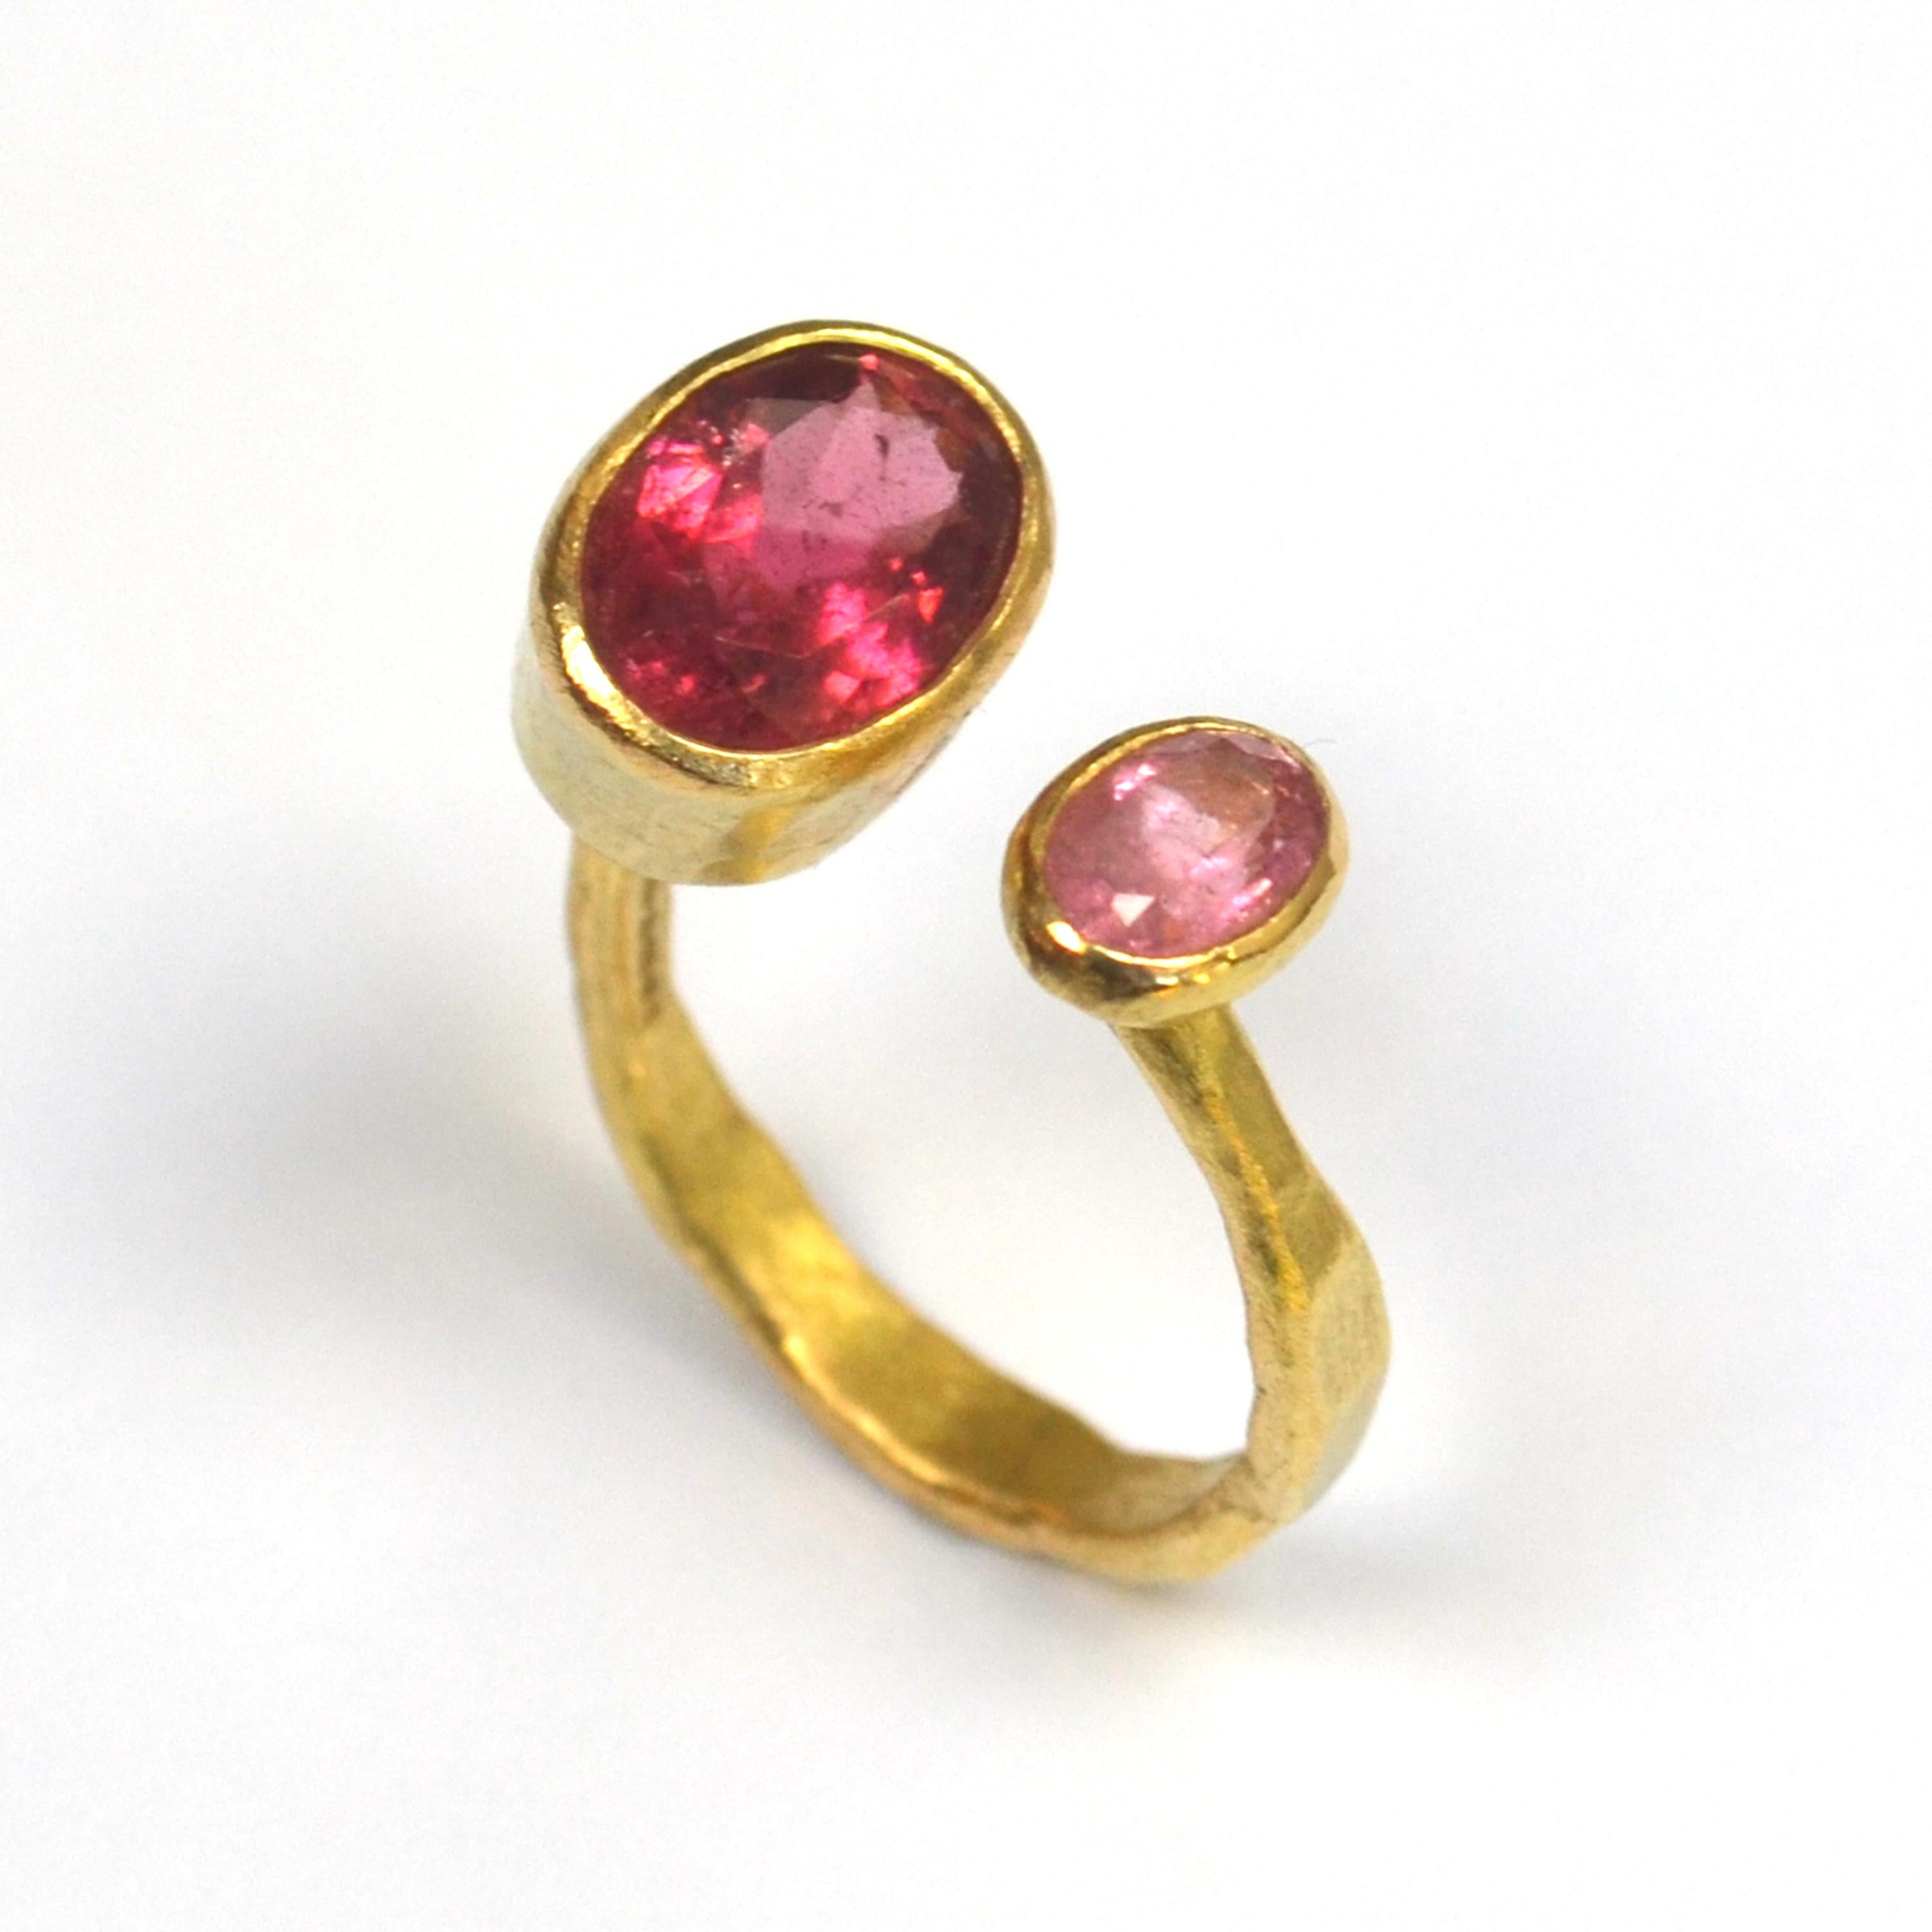 Oval Cut Contemporary Double Pink Tourmaline 18 Karat Gold Handmade Ring by Disa Allsopp For Sale